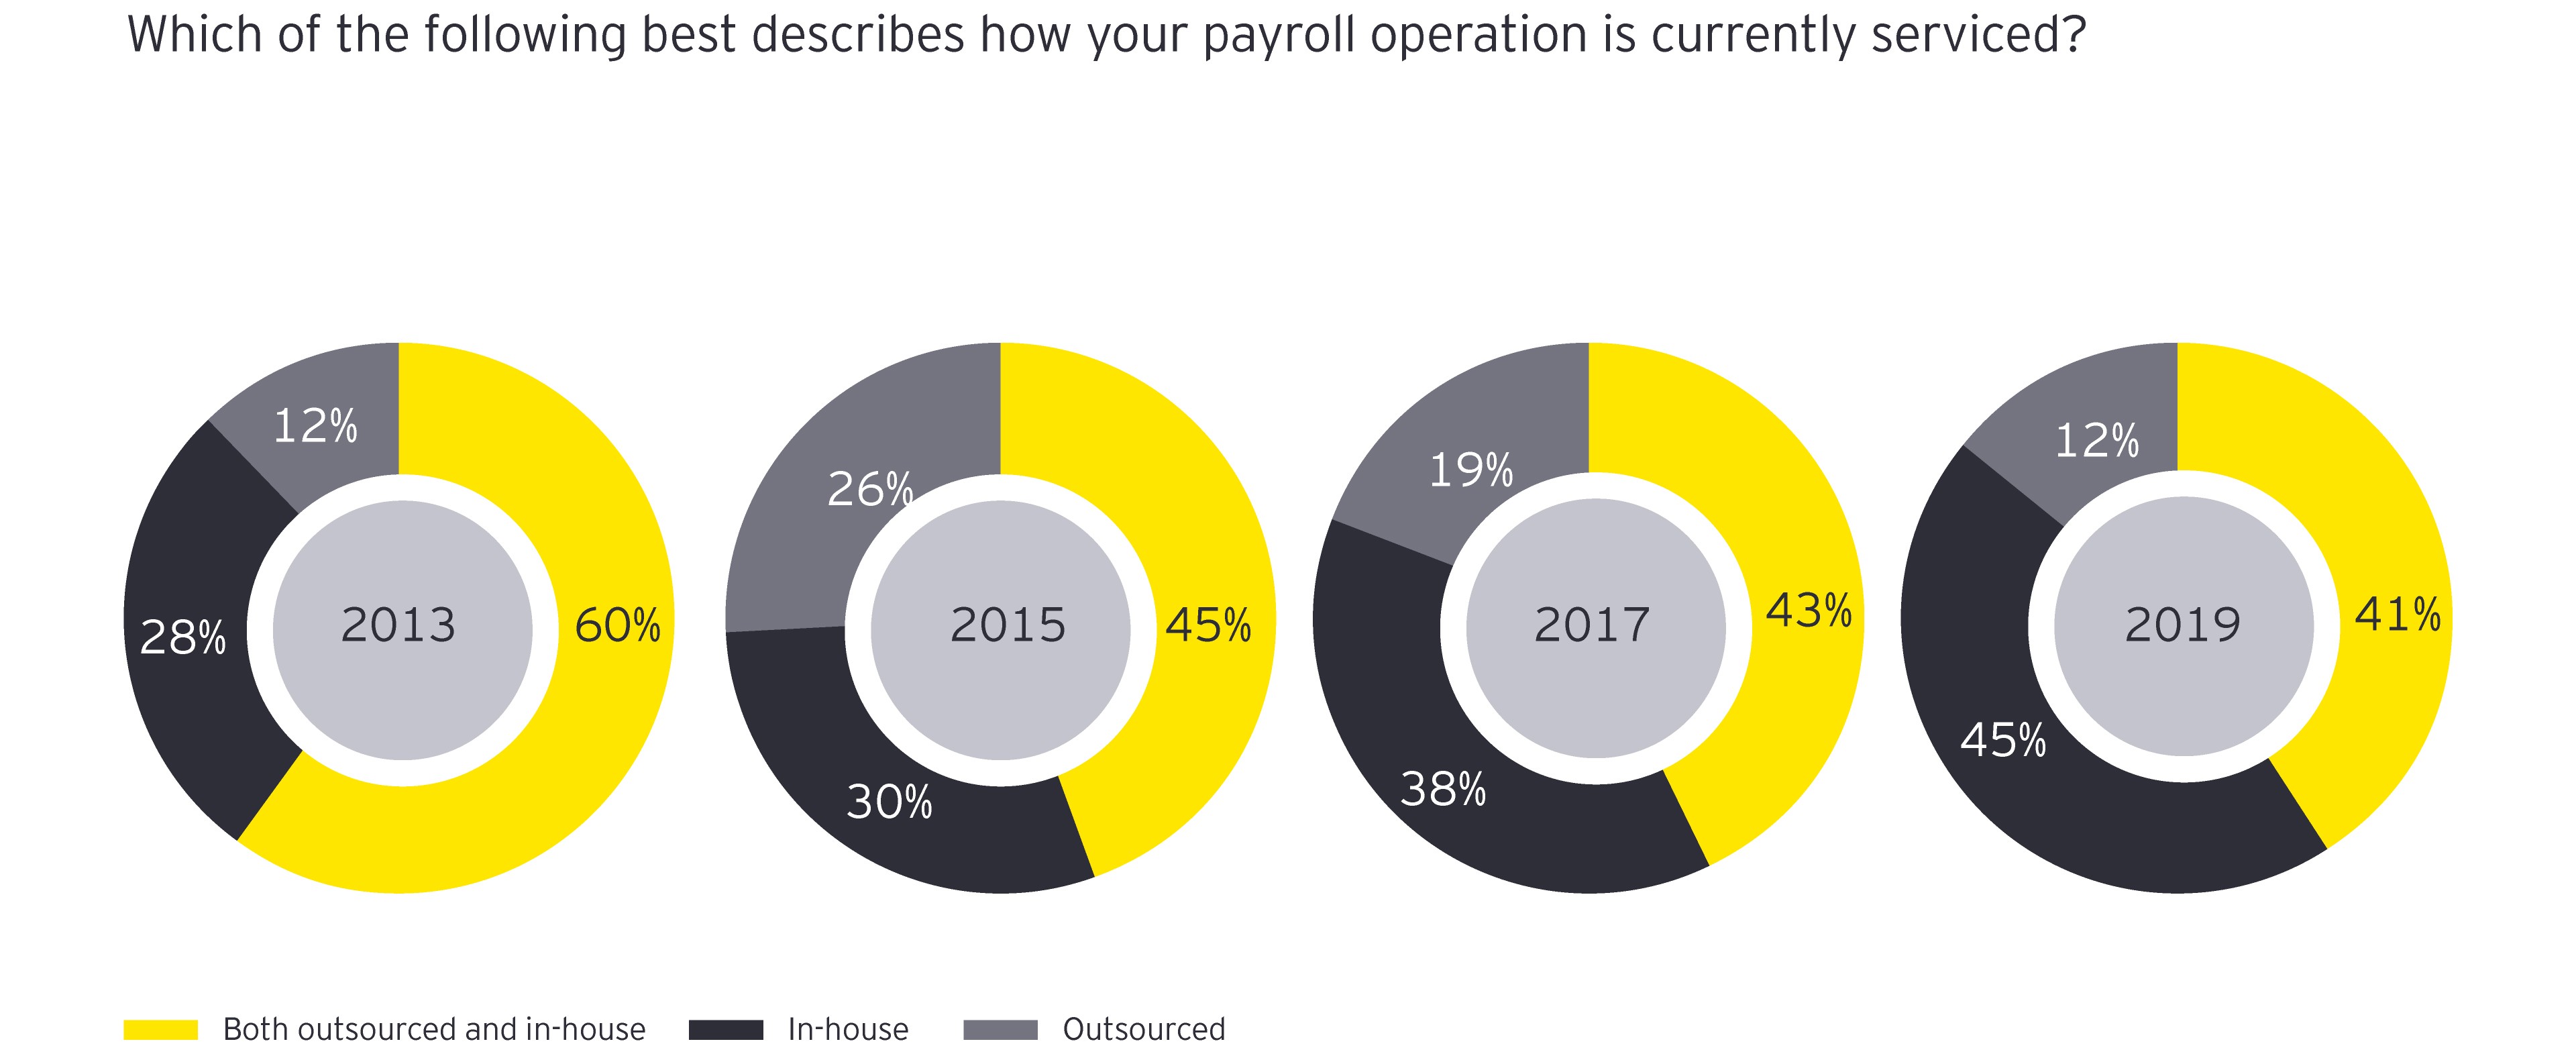 Which of the following best describes how your payroll operation is currently serviced